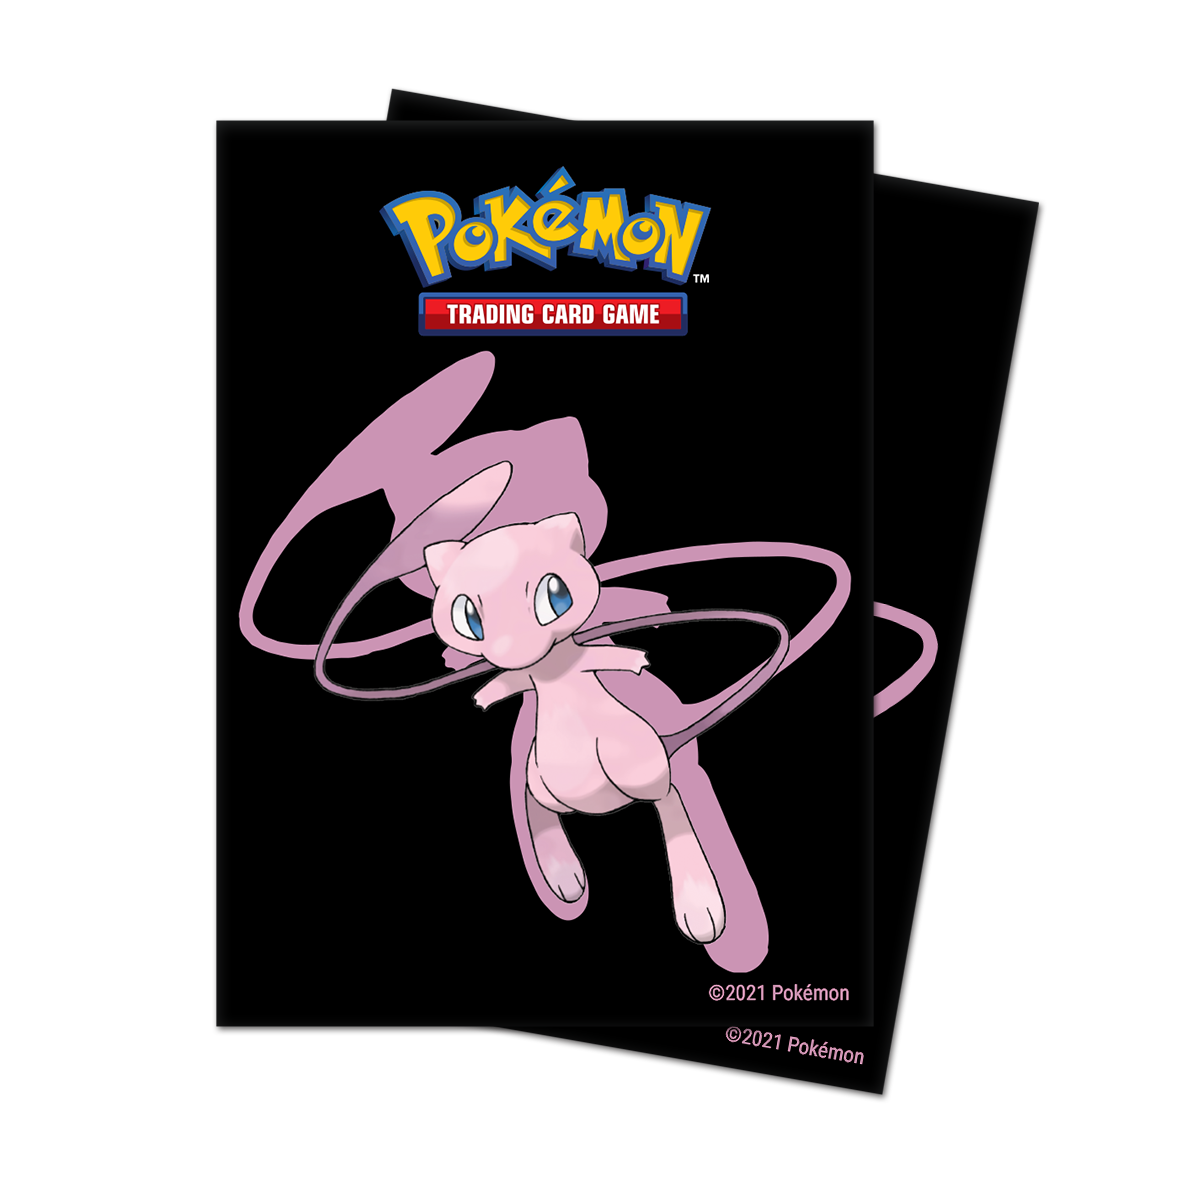 Ultra Pro Pokemon Trading Card Sleeves | Deck Protectors | Standard Size 65  Pack